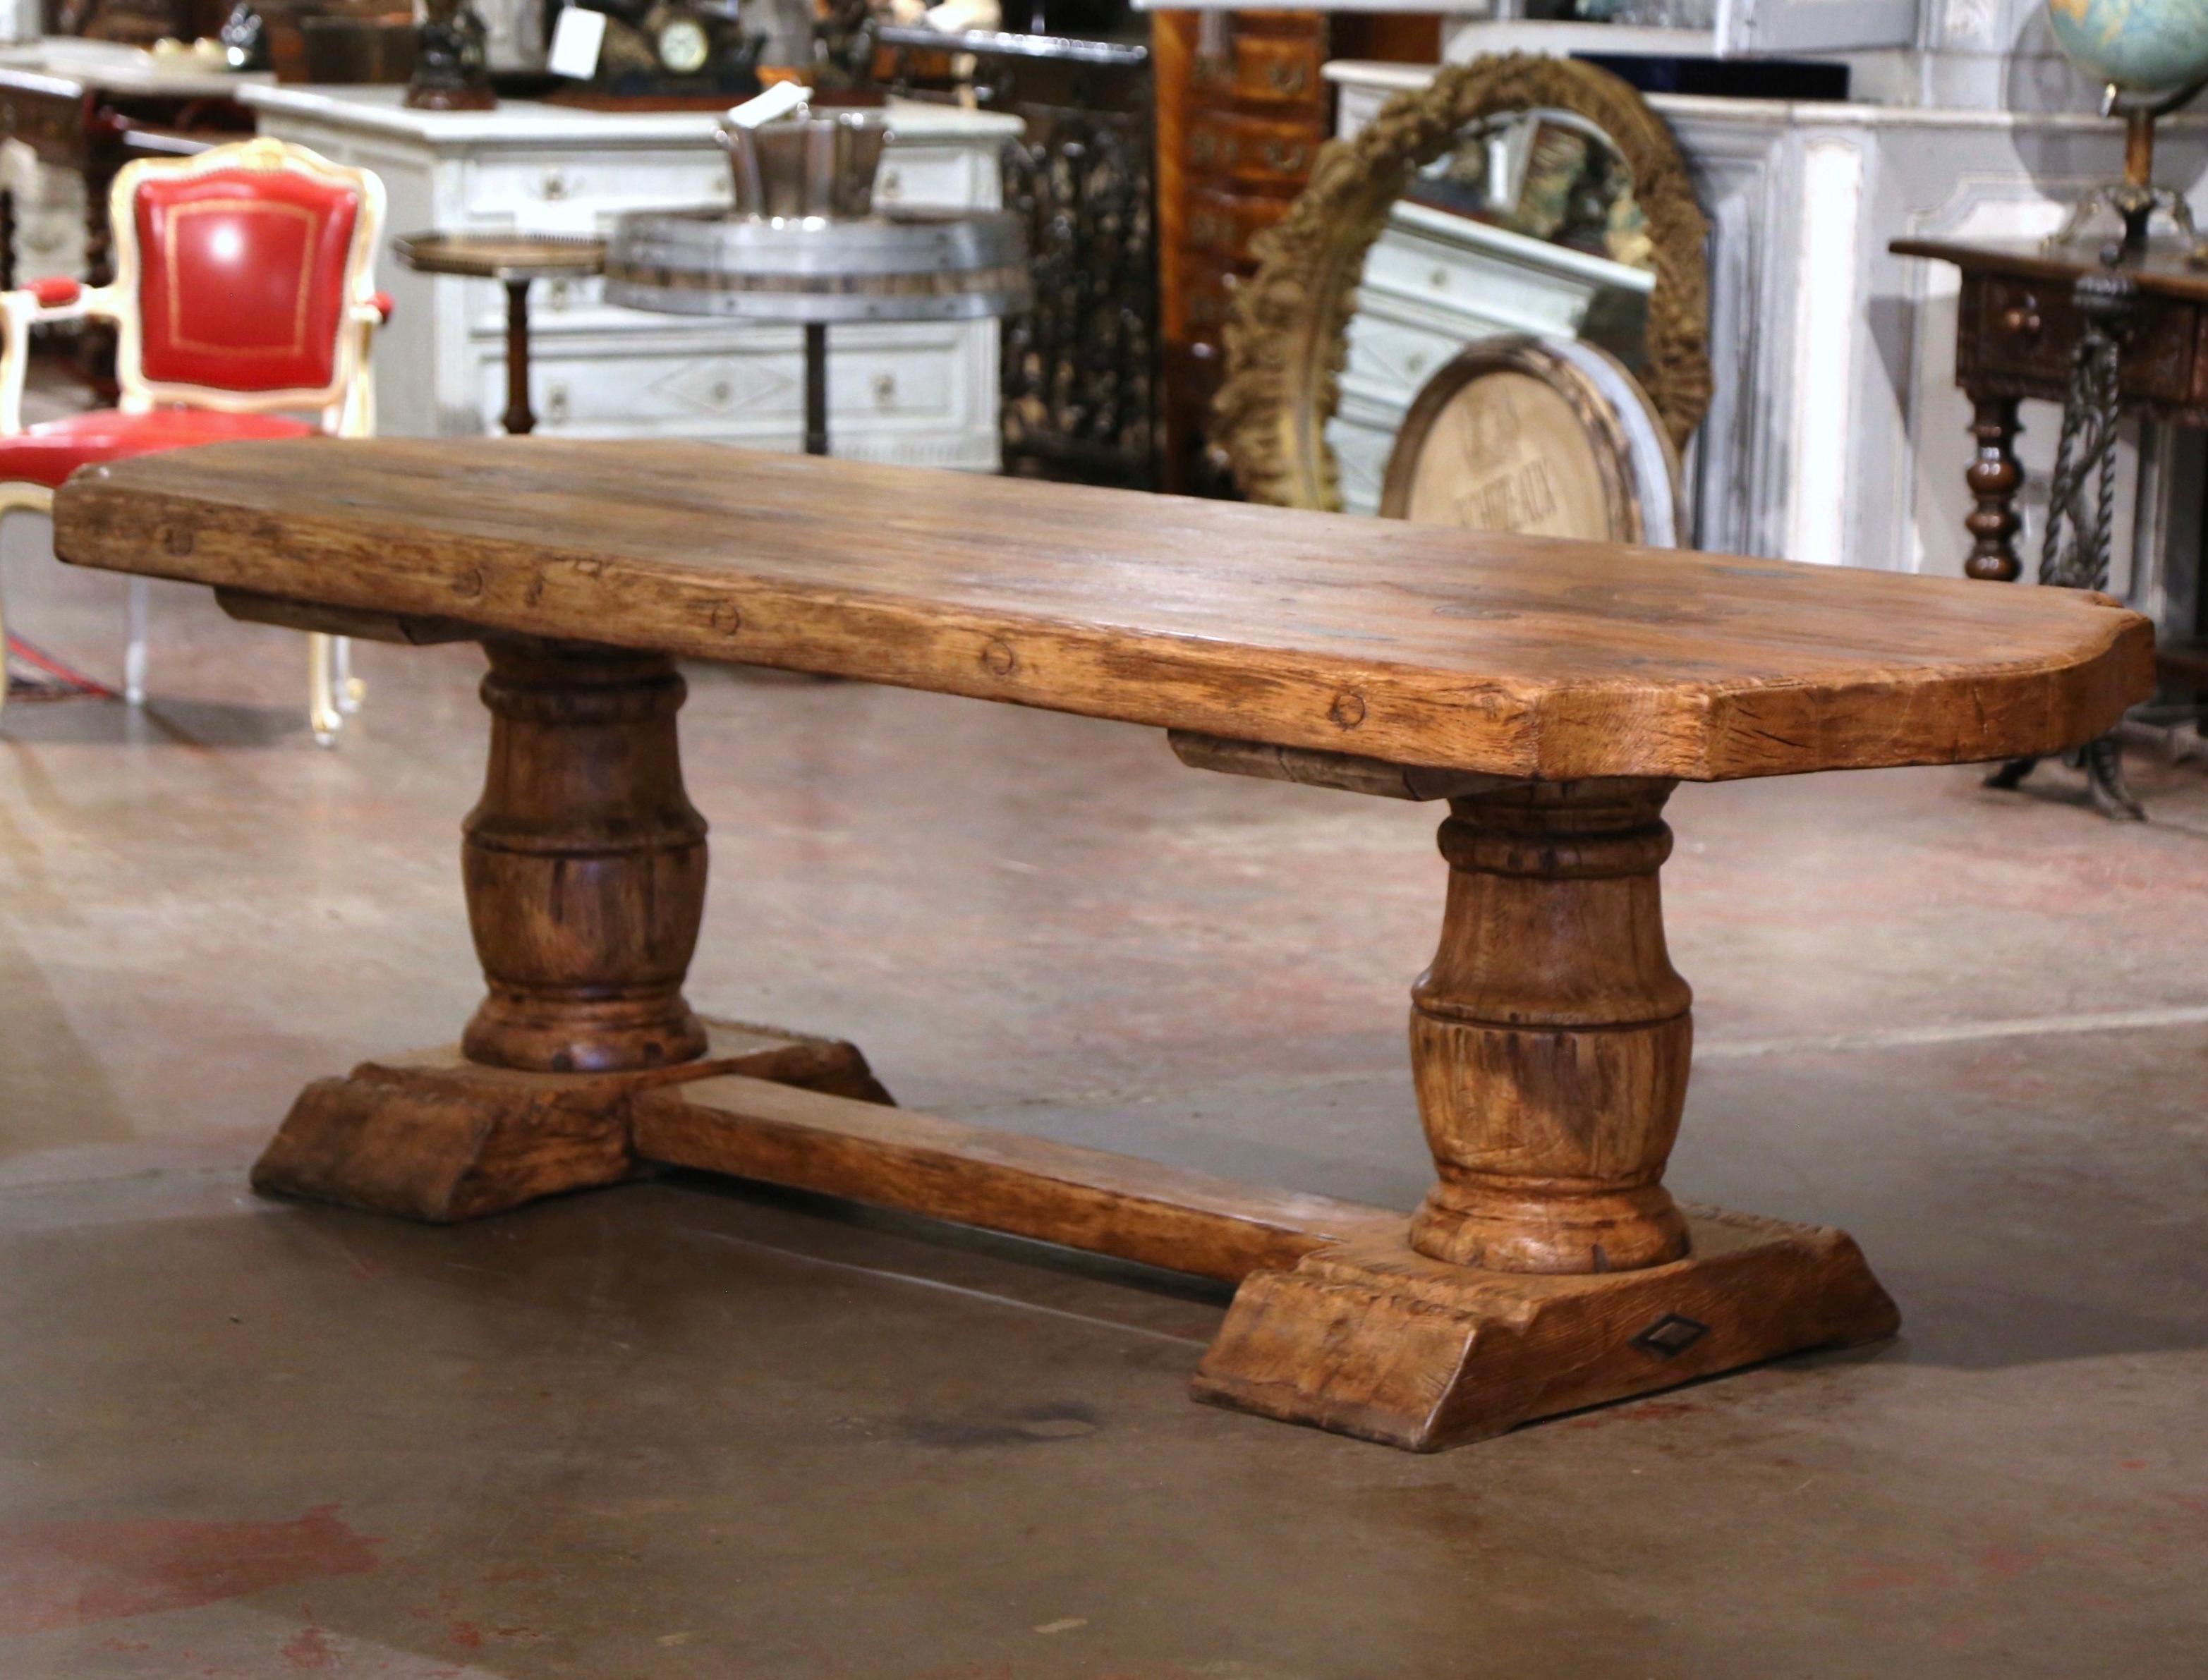 This elegant antique dining table was crafted in Normandy, France circa 1920. Built of solid oak, the rustic table stands on two substantial carved baluster-form support legs ending with molded shoe base, and joined by cross stretcher. The pedestal